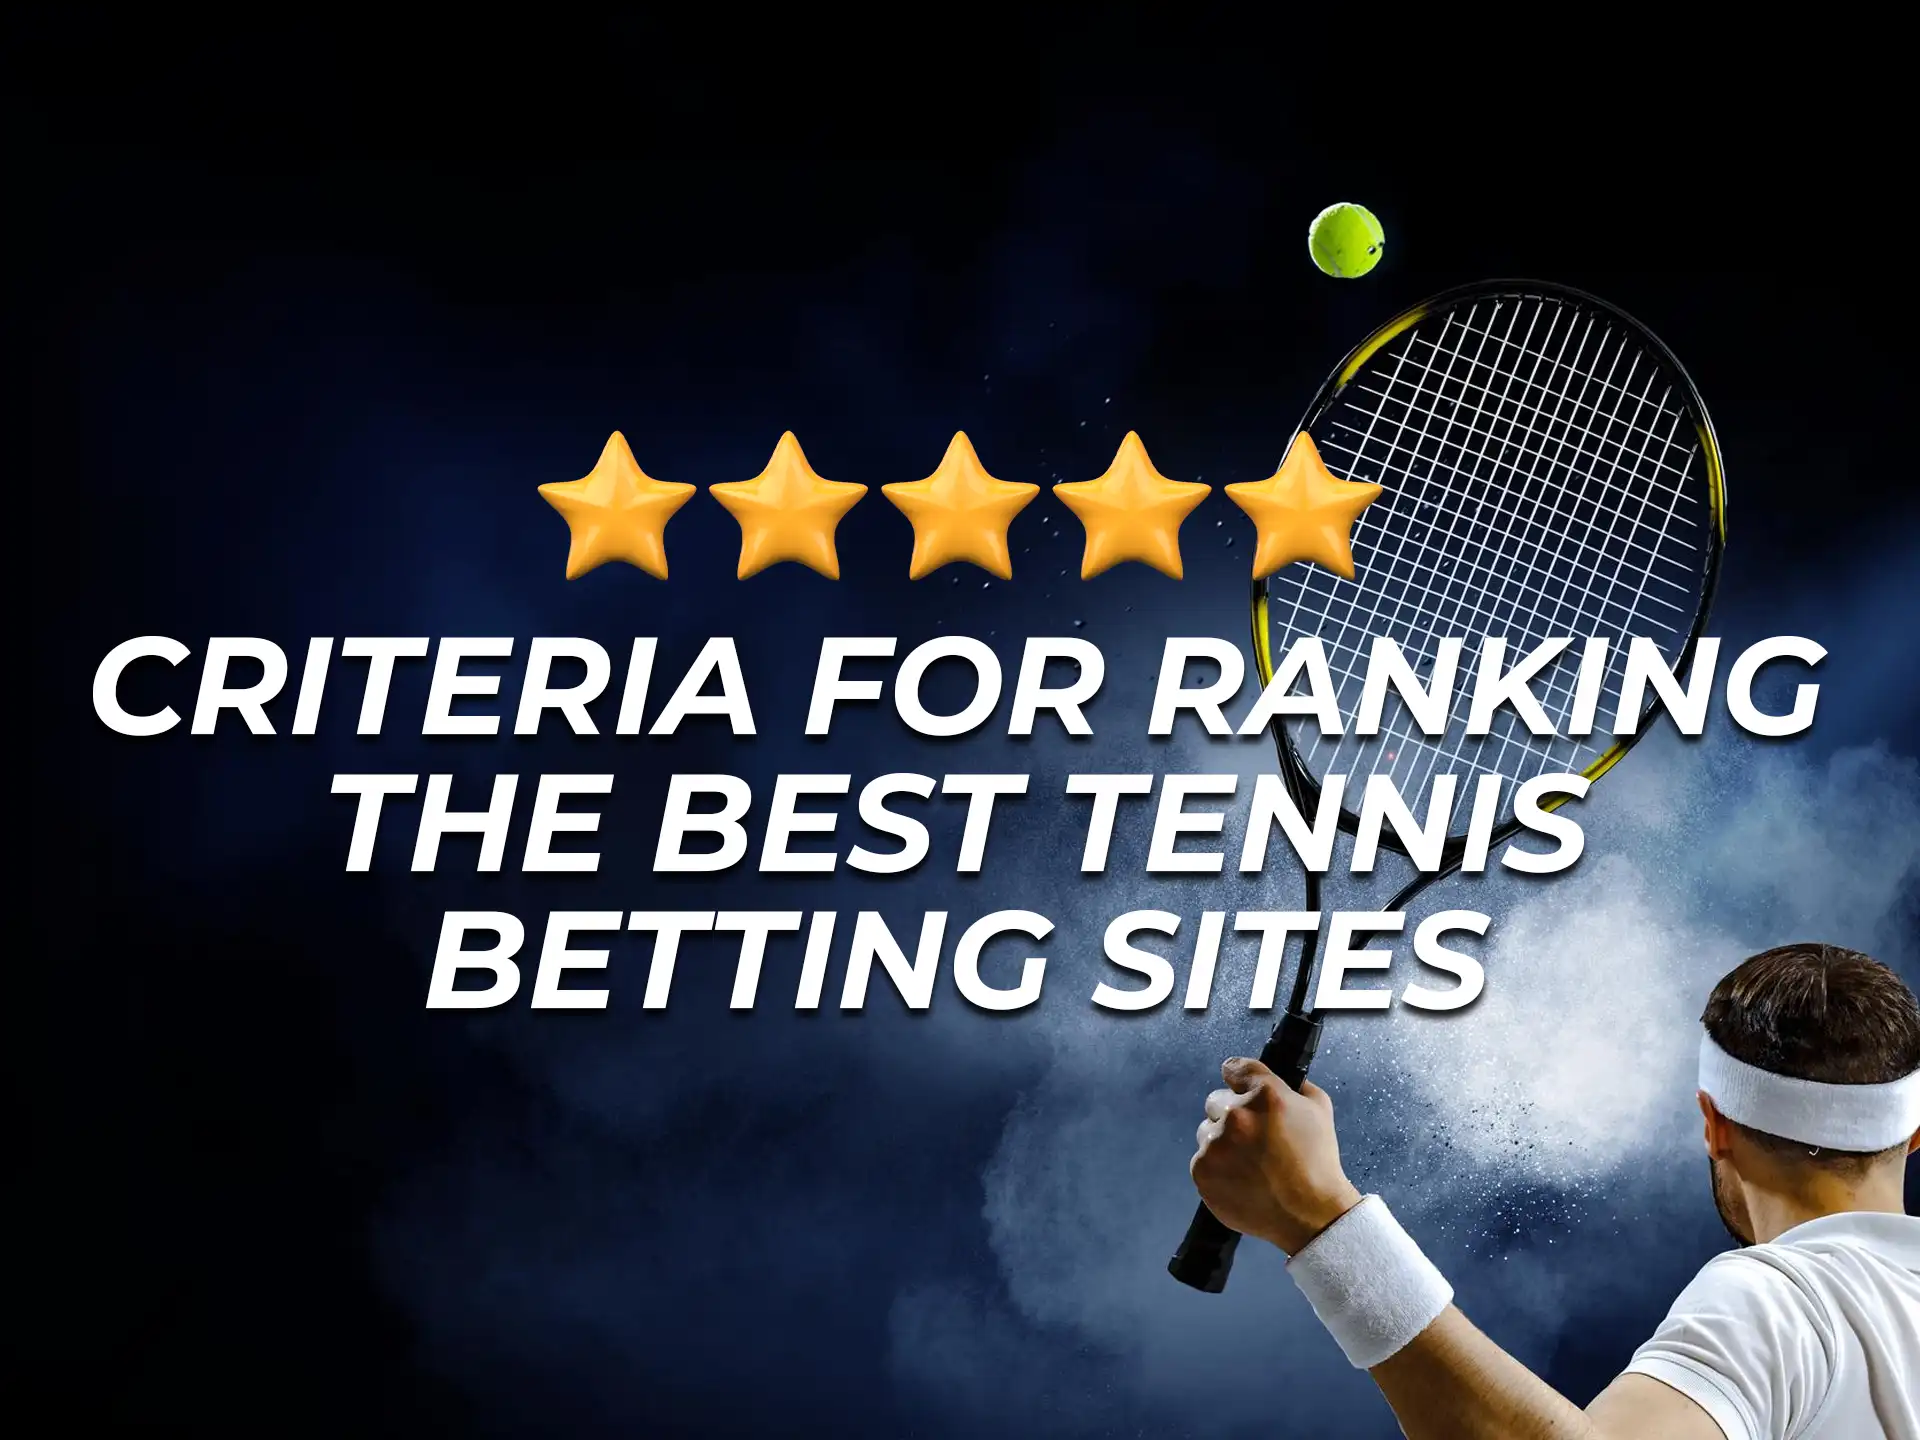 To rank the best sites there are mandatory criteria.